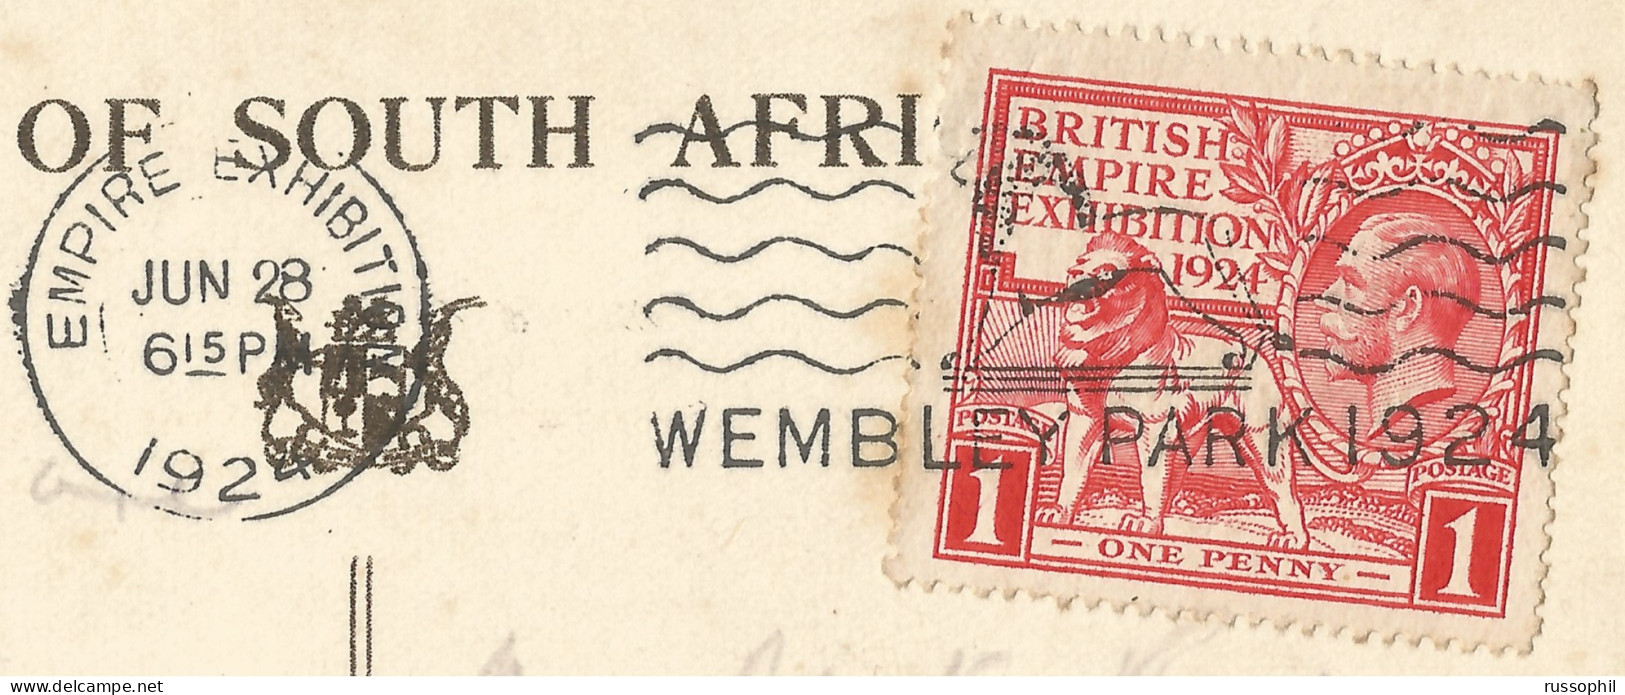 UK - "ONE PENNY BRITISH EMPIRE EXHIBITION 1924" ALONE FRANKING PC TO PORTSMOUTH -1924 - Covers & Documents